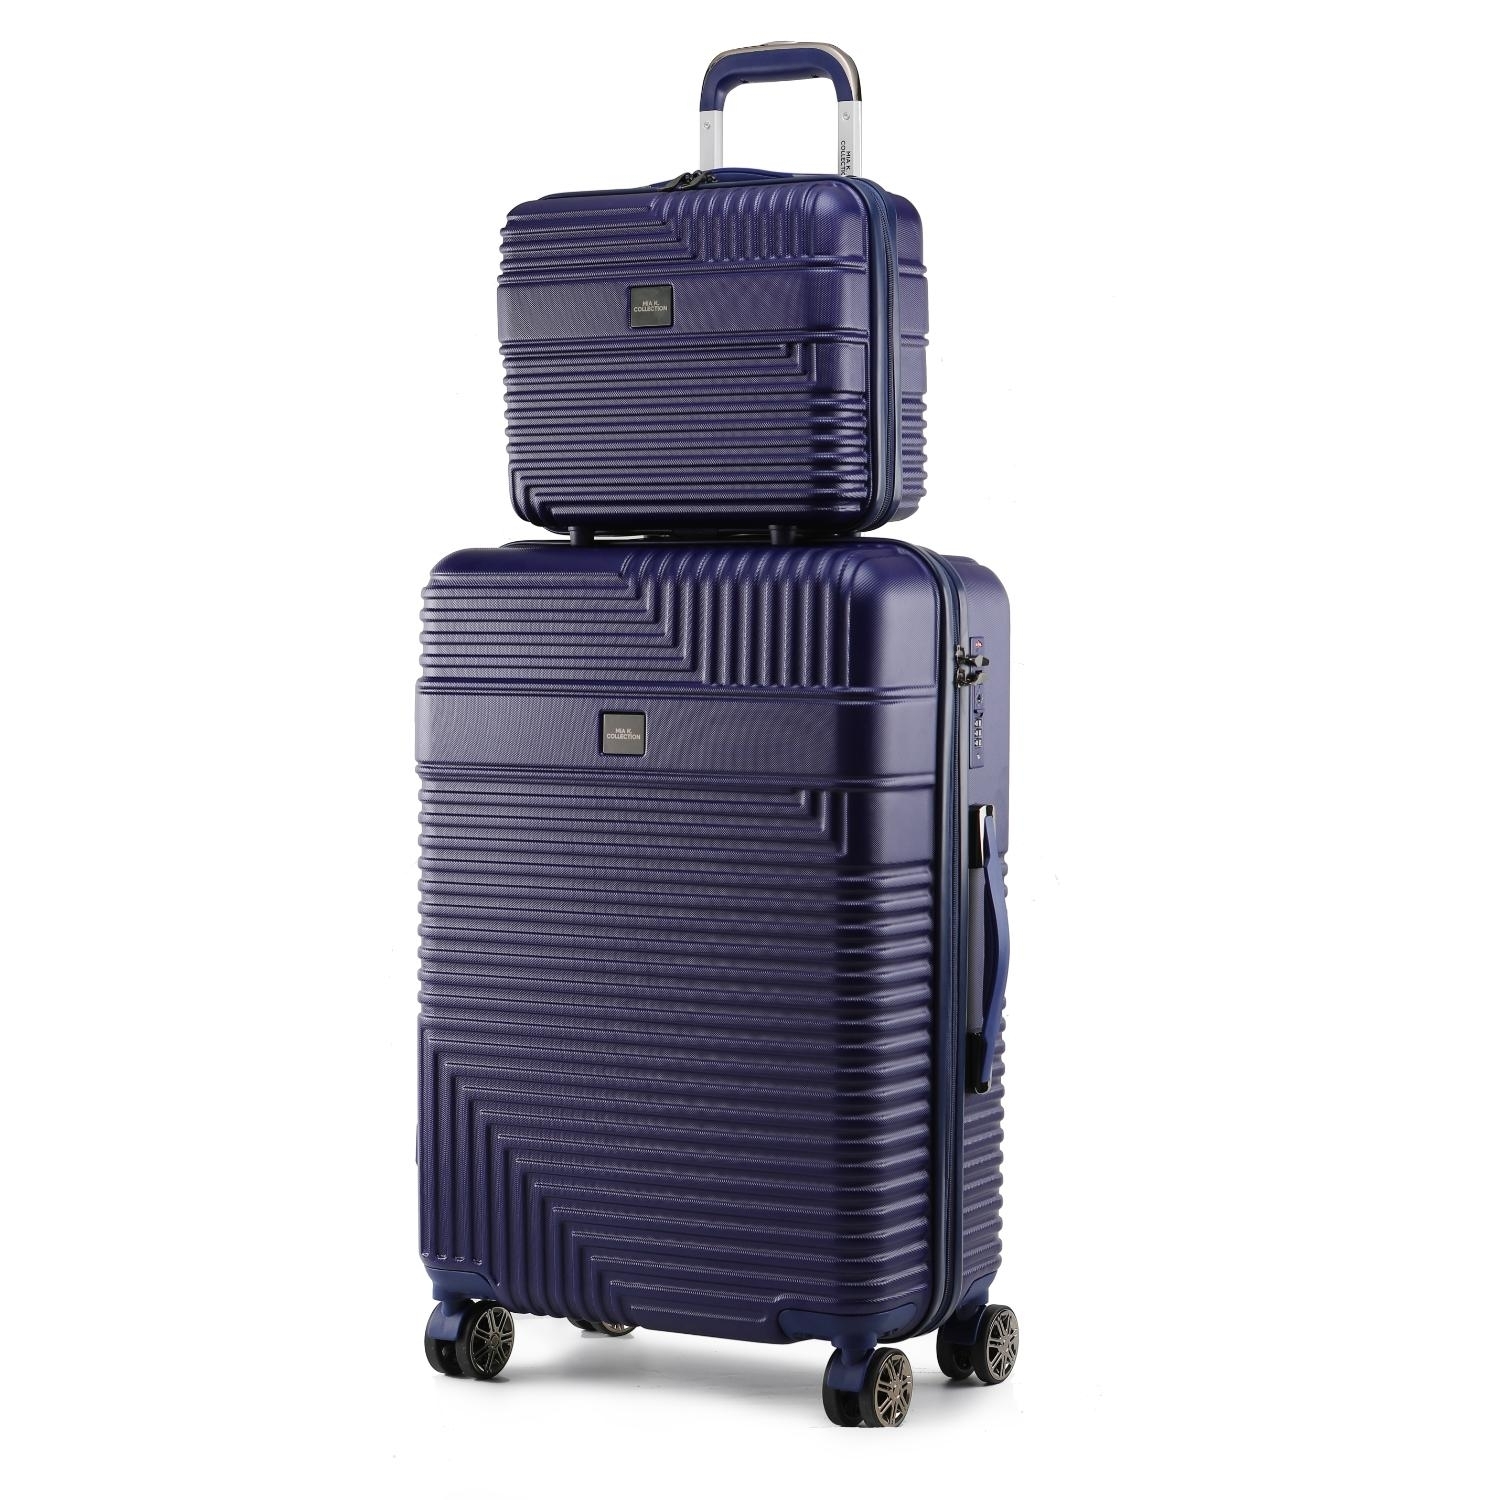 MKF Collection Mykonos Luggage Set With A Medium Carry-on And Small Cosmetic Case 2 Pieces By Mia K - Navy